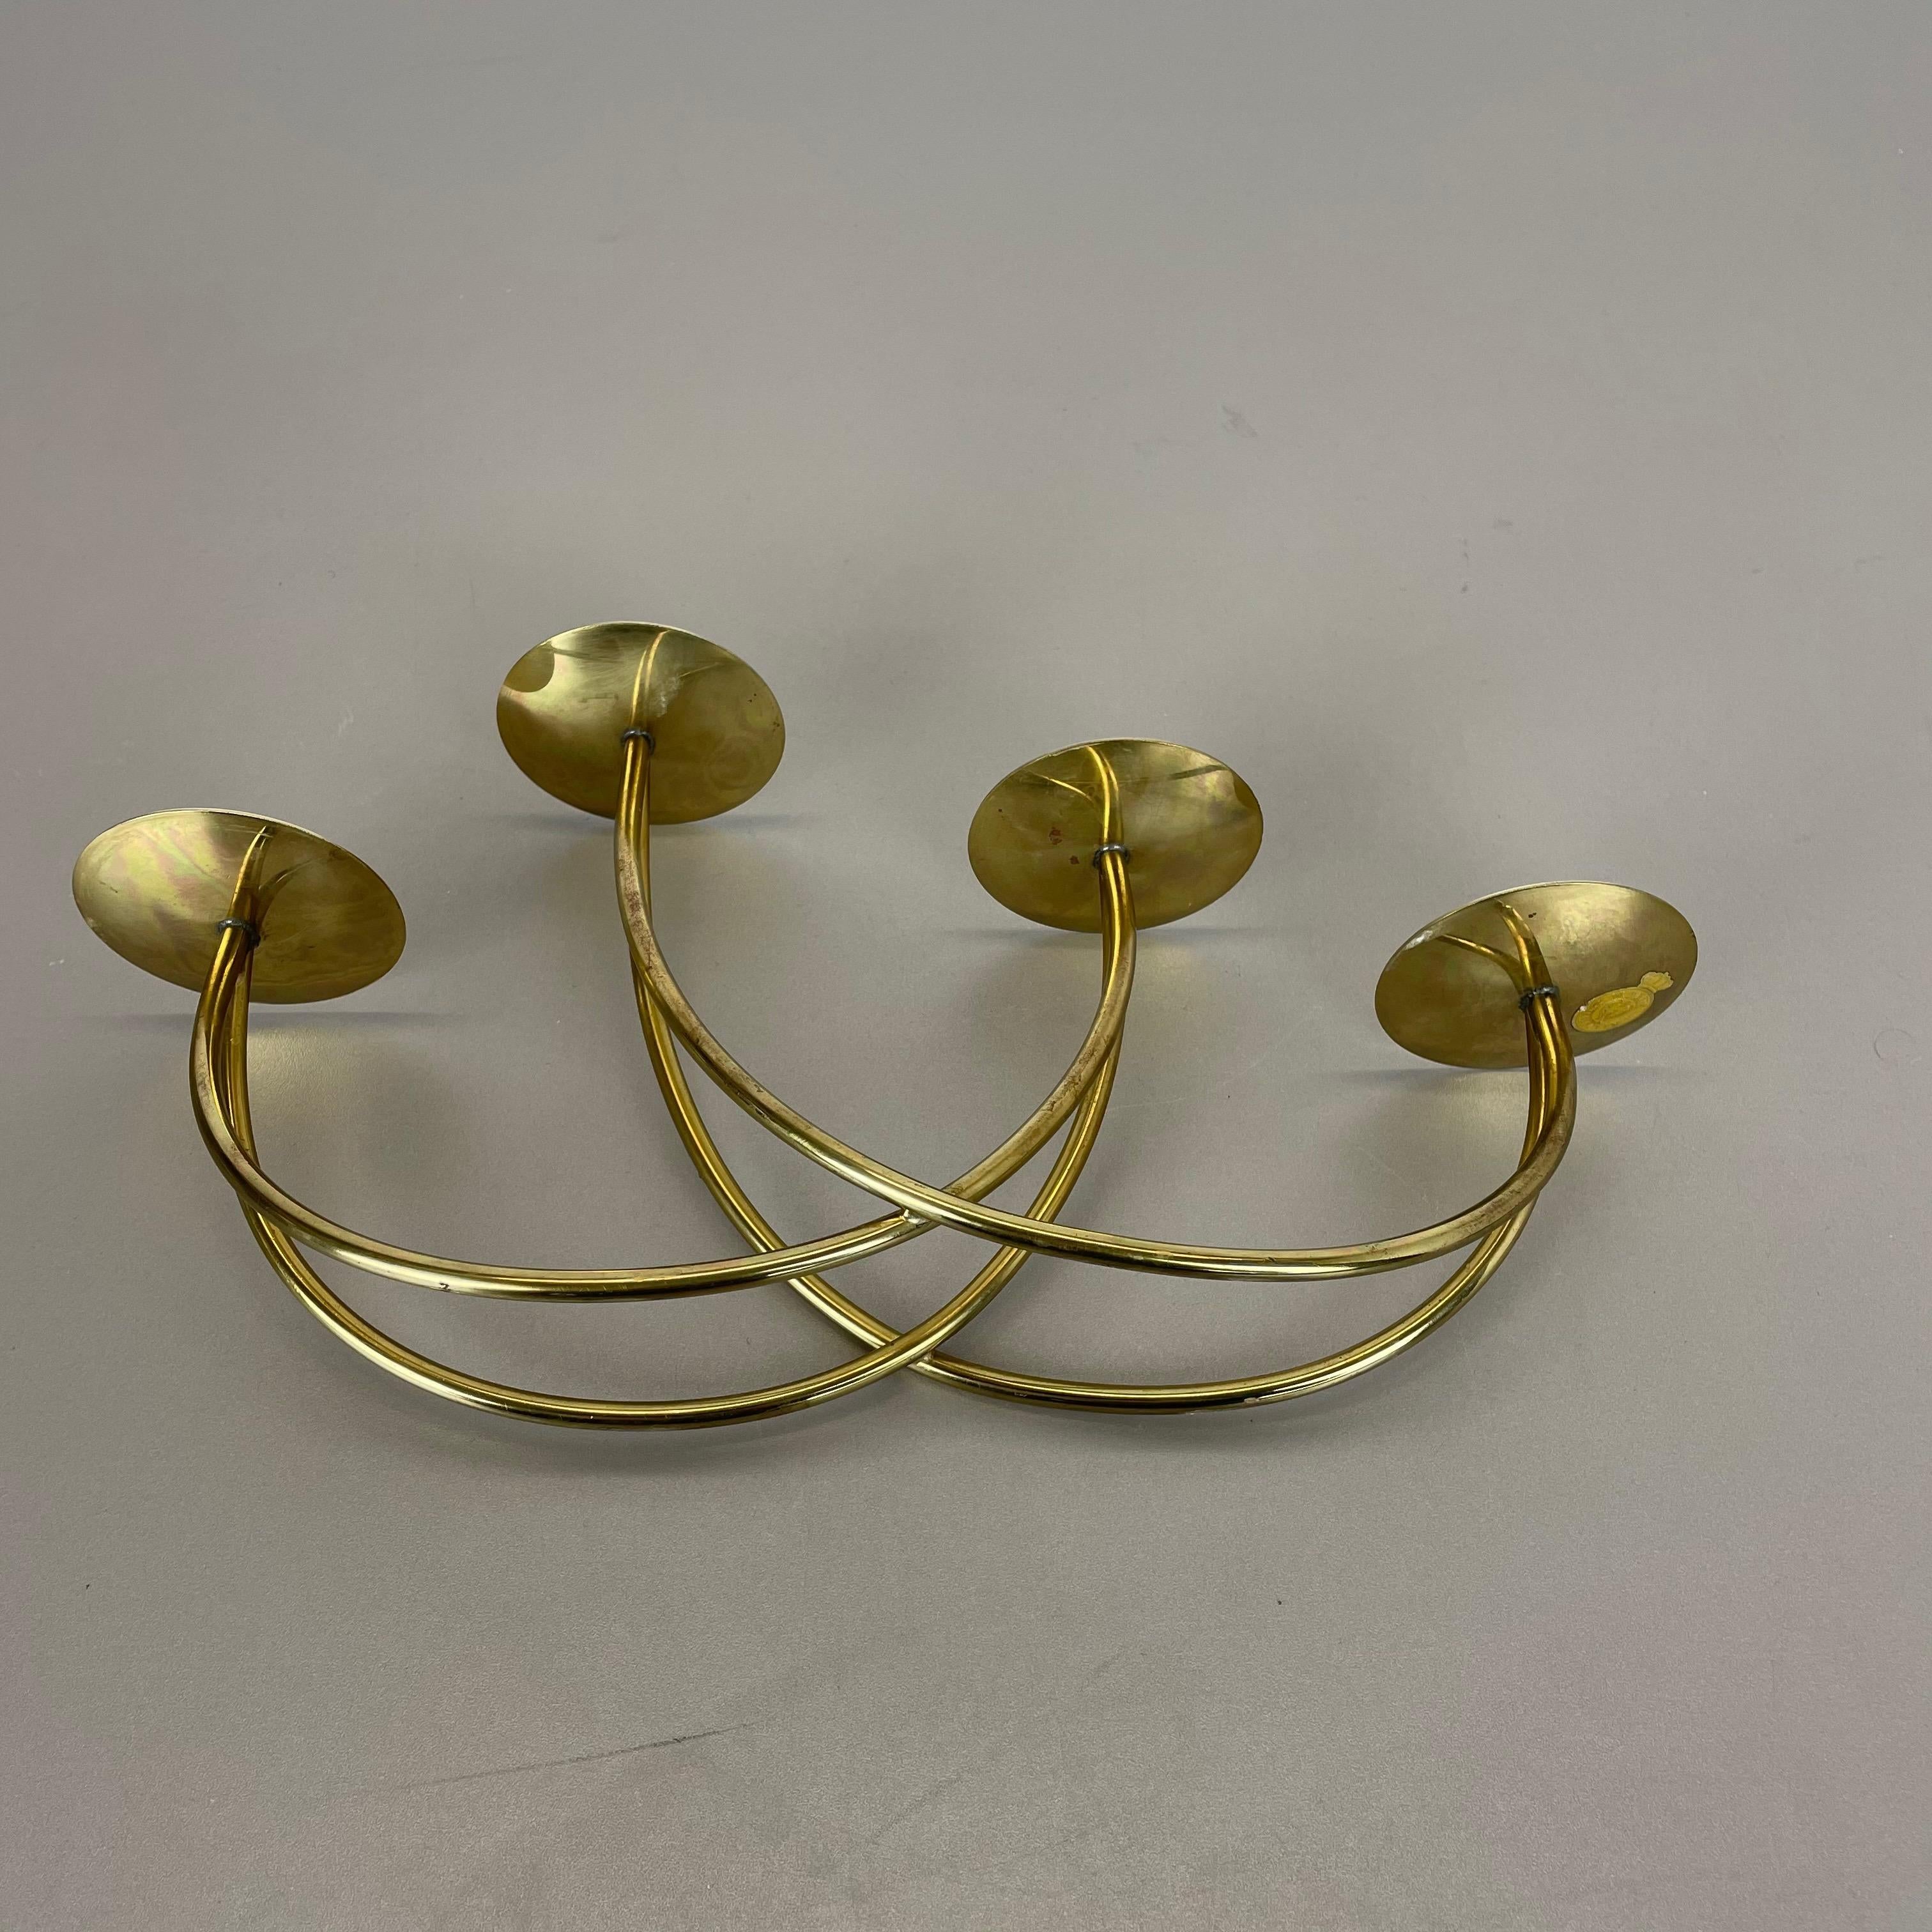 Sculptural Solid Brass Candleholder by Harald Buchrucker Bauhaus, Germany, 1950s For Sale 9